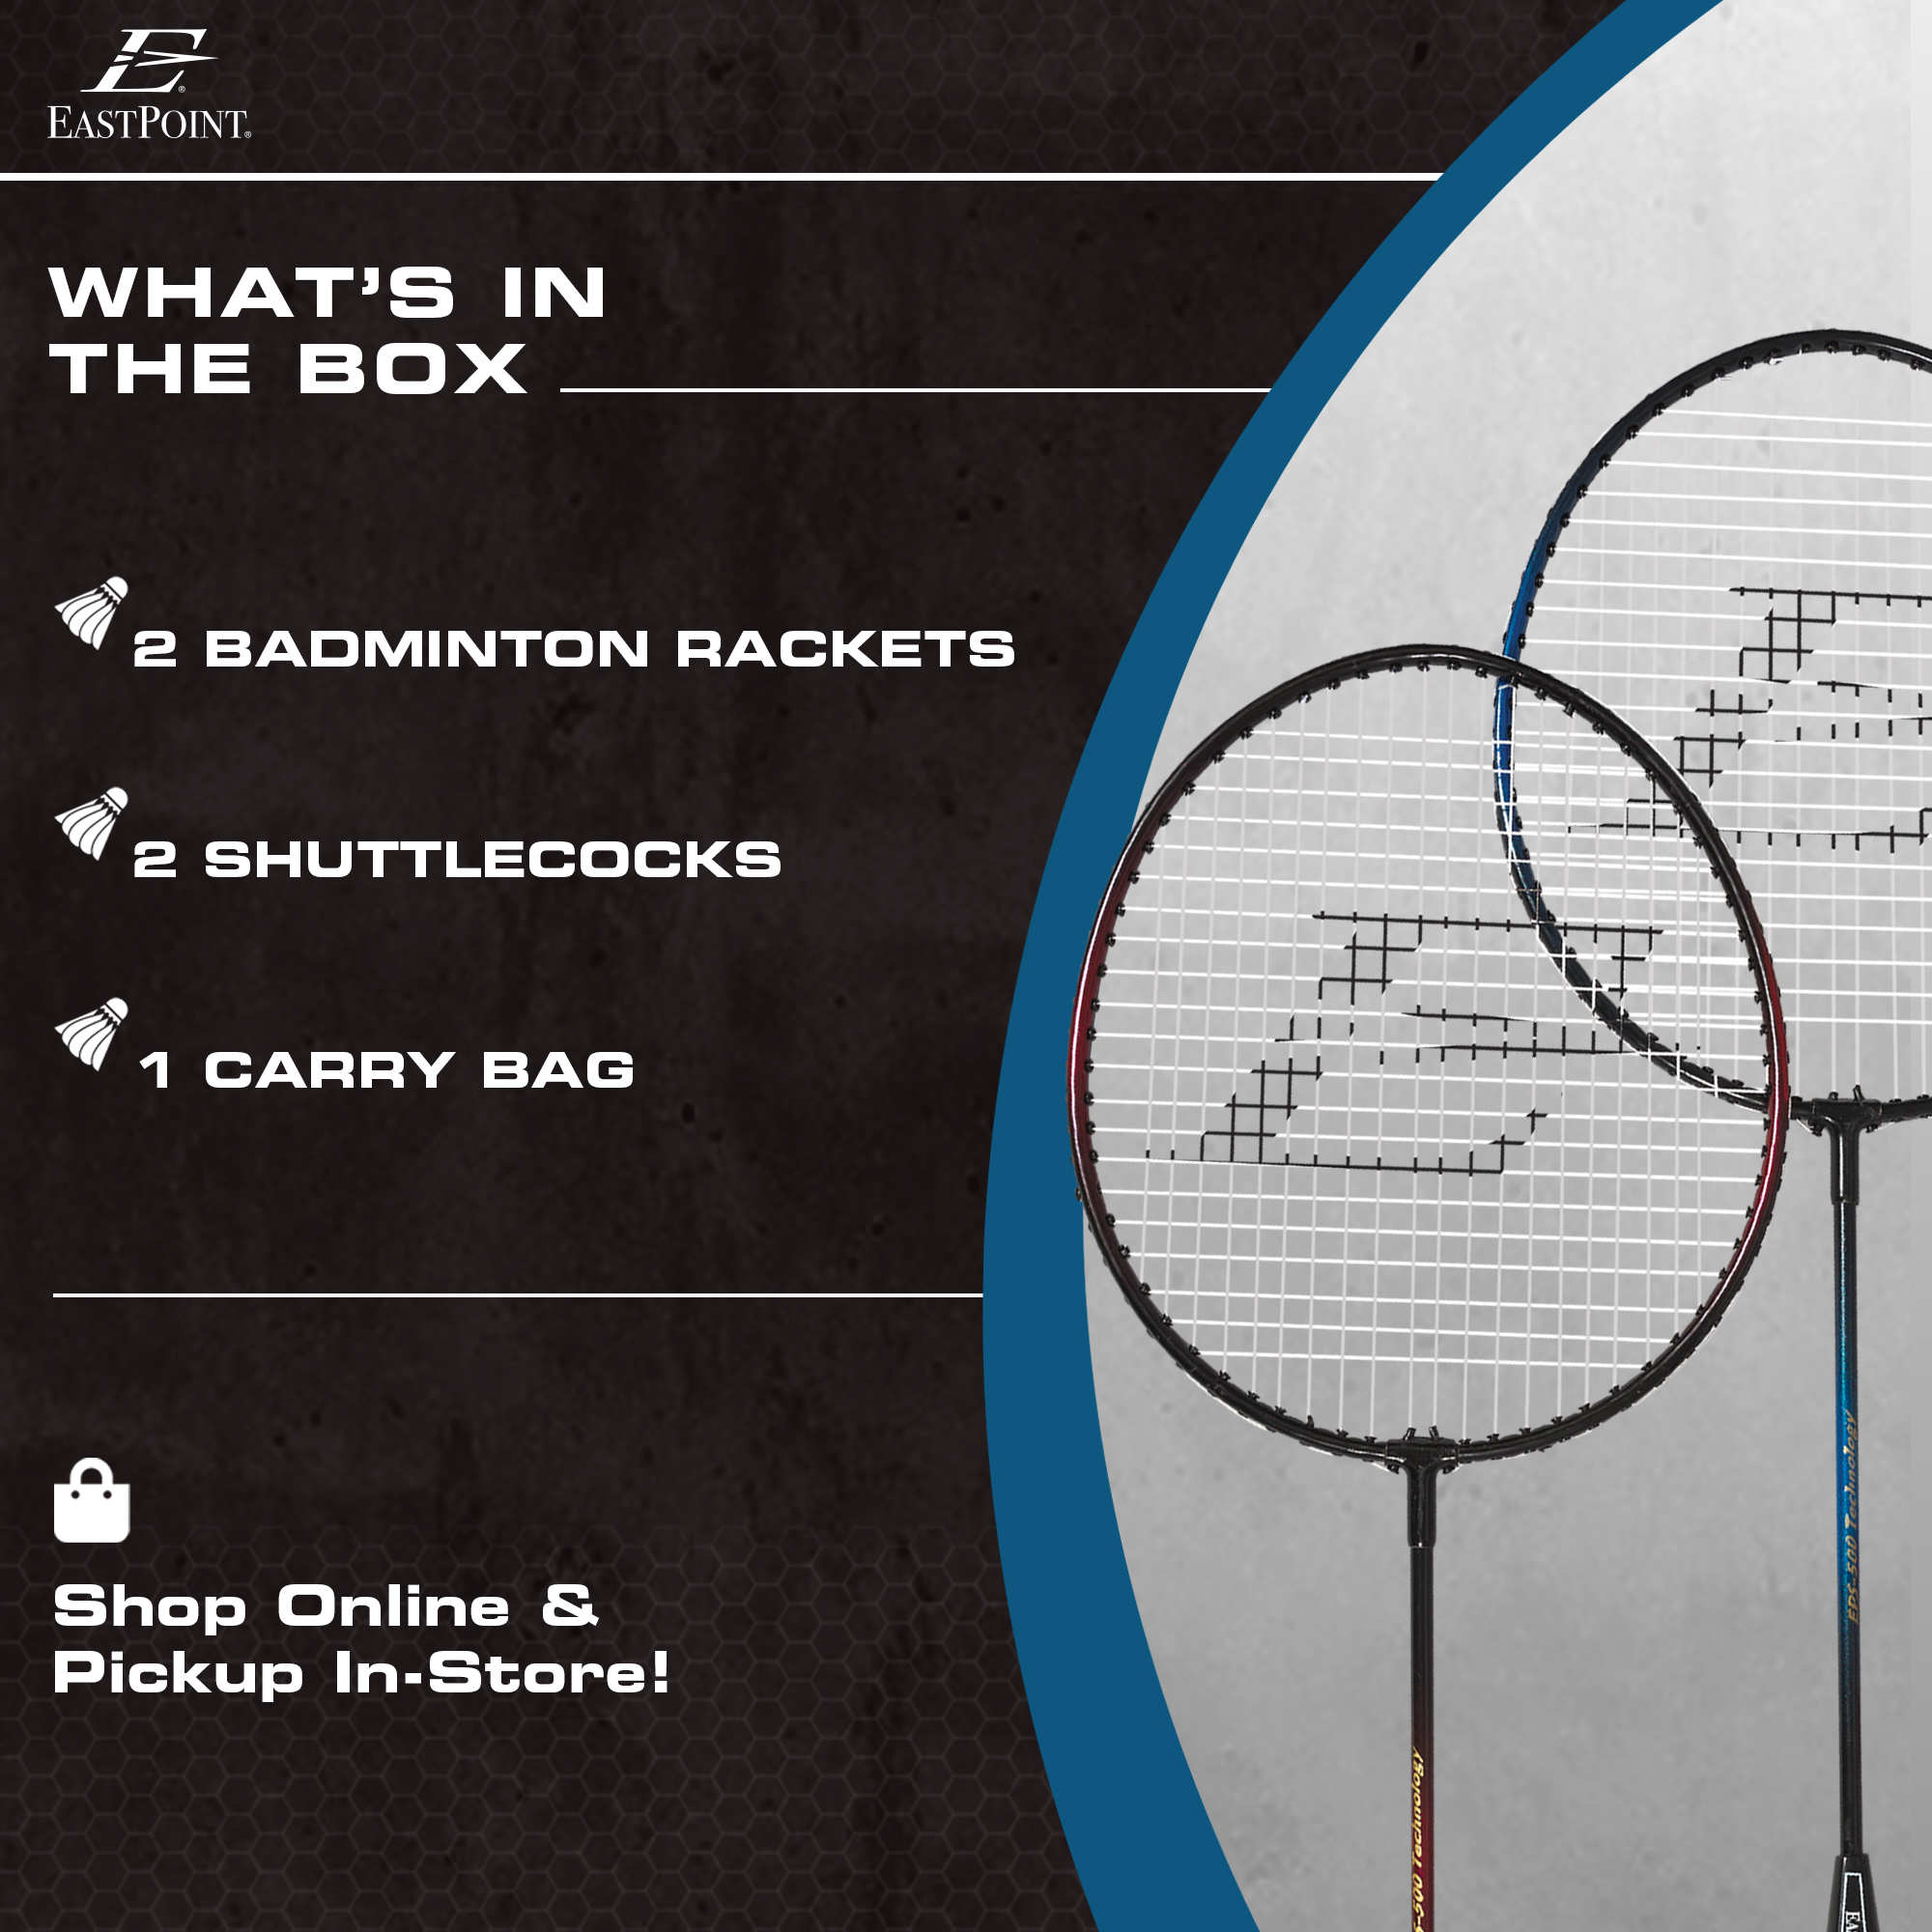 EastPoint Sports 2 Player Badminton Racket Set; Contains 2 Rackets with Tempered Steel Shafts, Comfort Handles and 2 Durable, White Shuttlecock Birdies - image 2 of 7